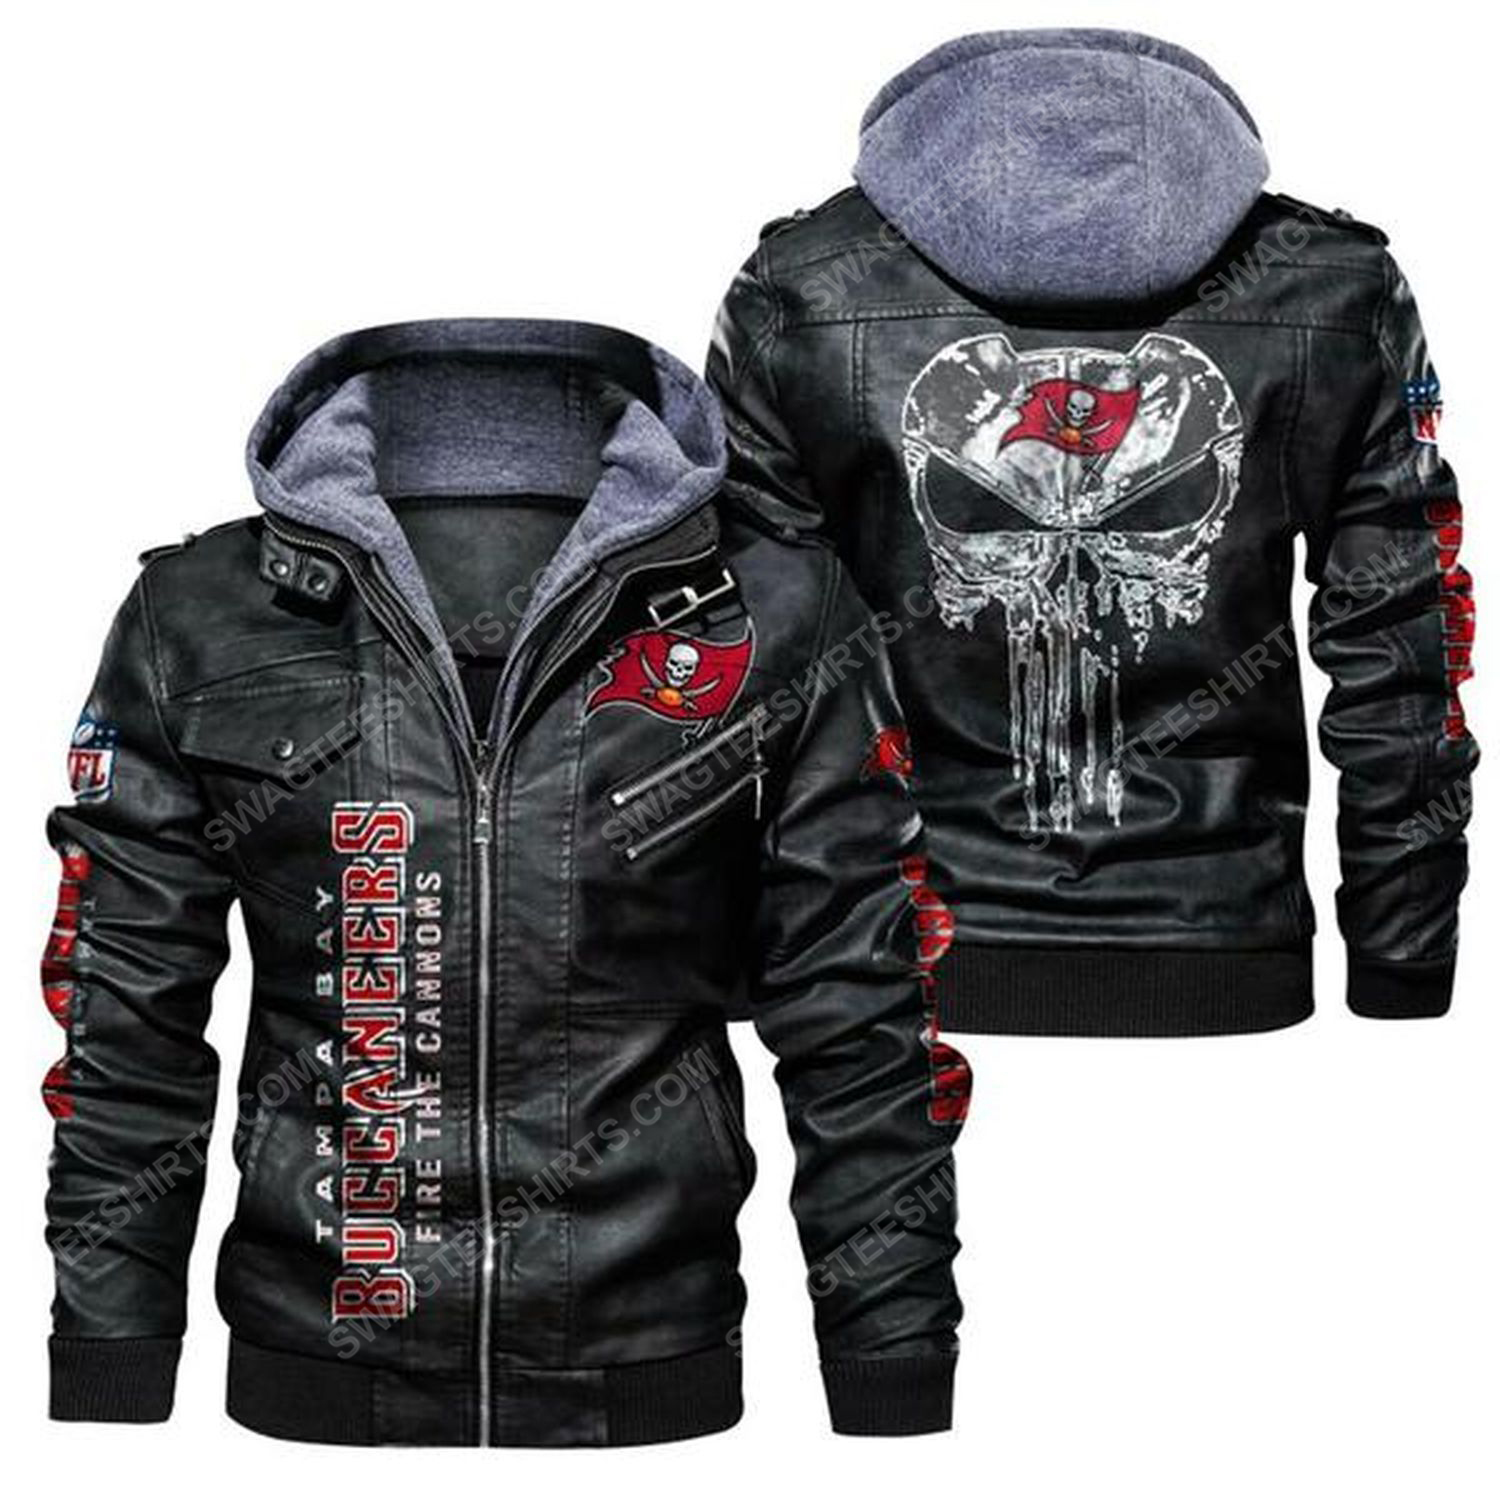 [special edition] National football league tampa bay buccaneers leather jacket- Maria